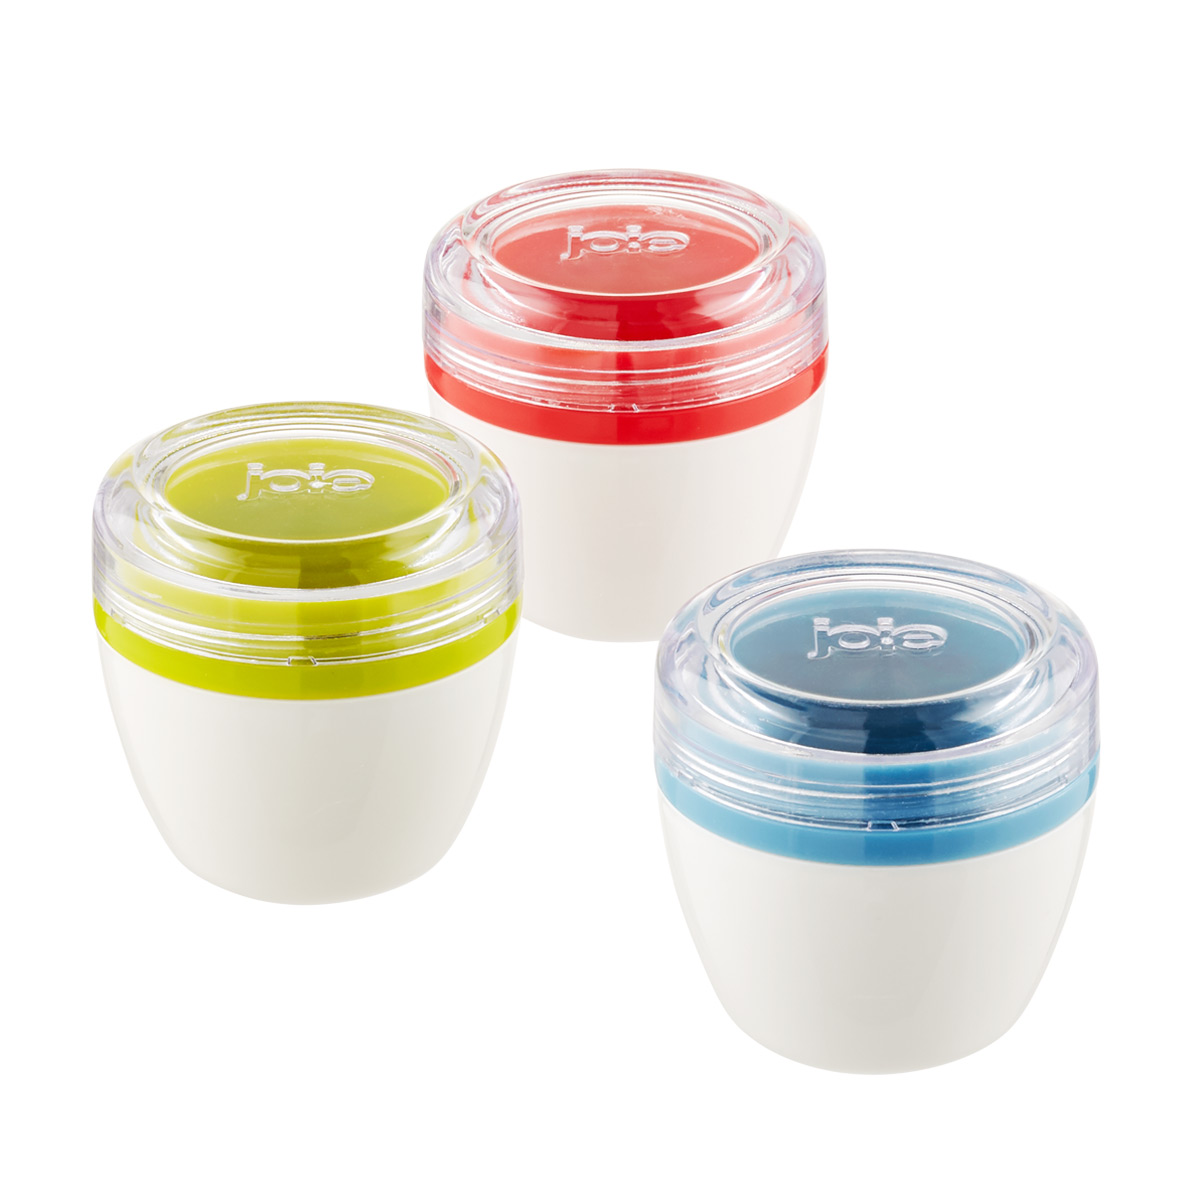 Joie Food Storage, Kitchen Gadgets, Joie Containers